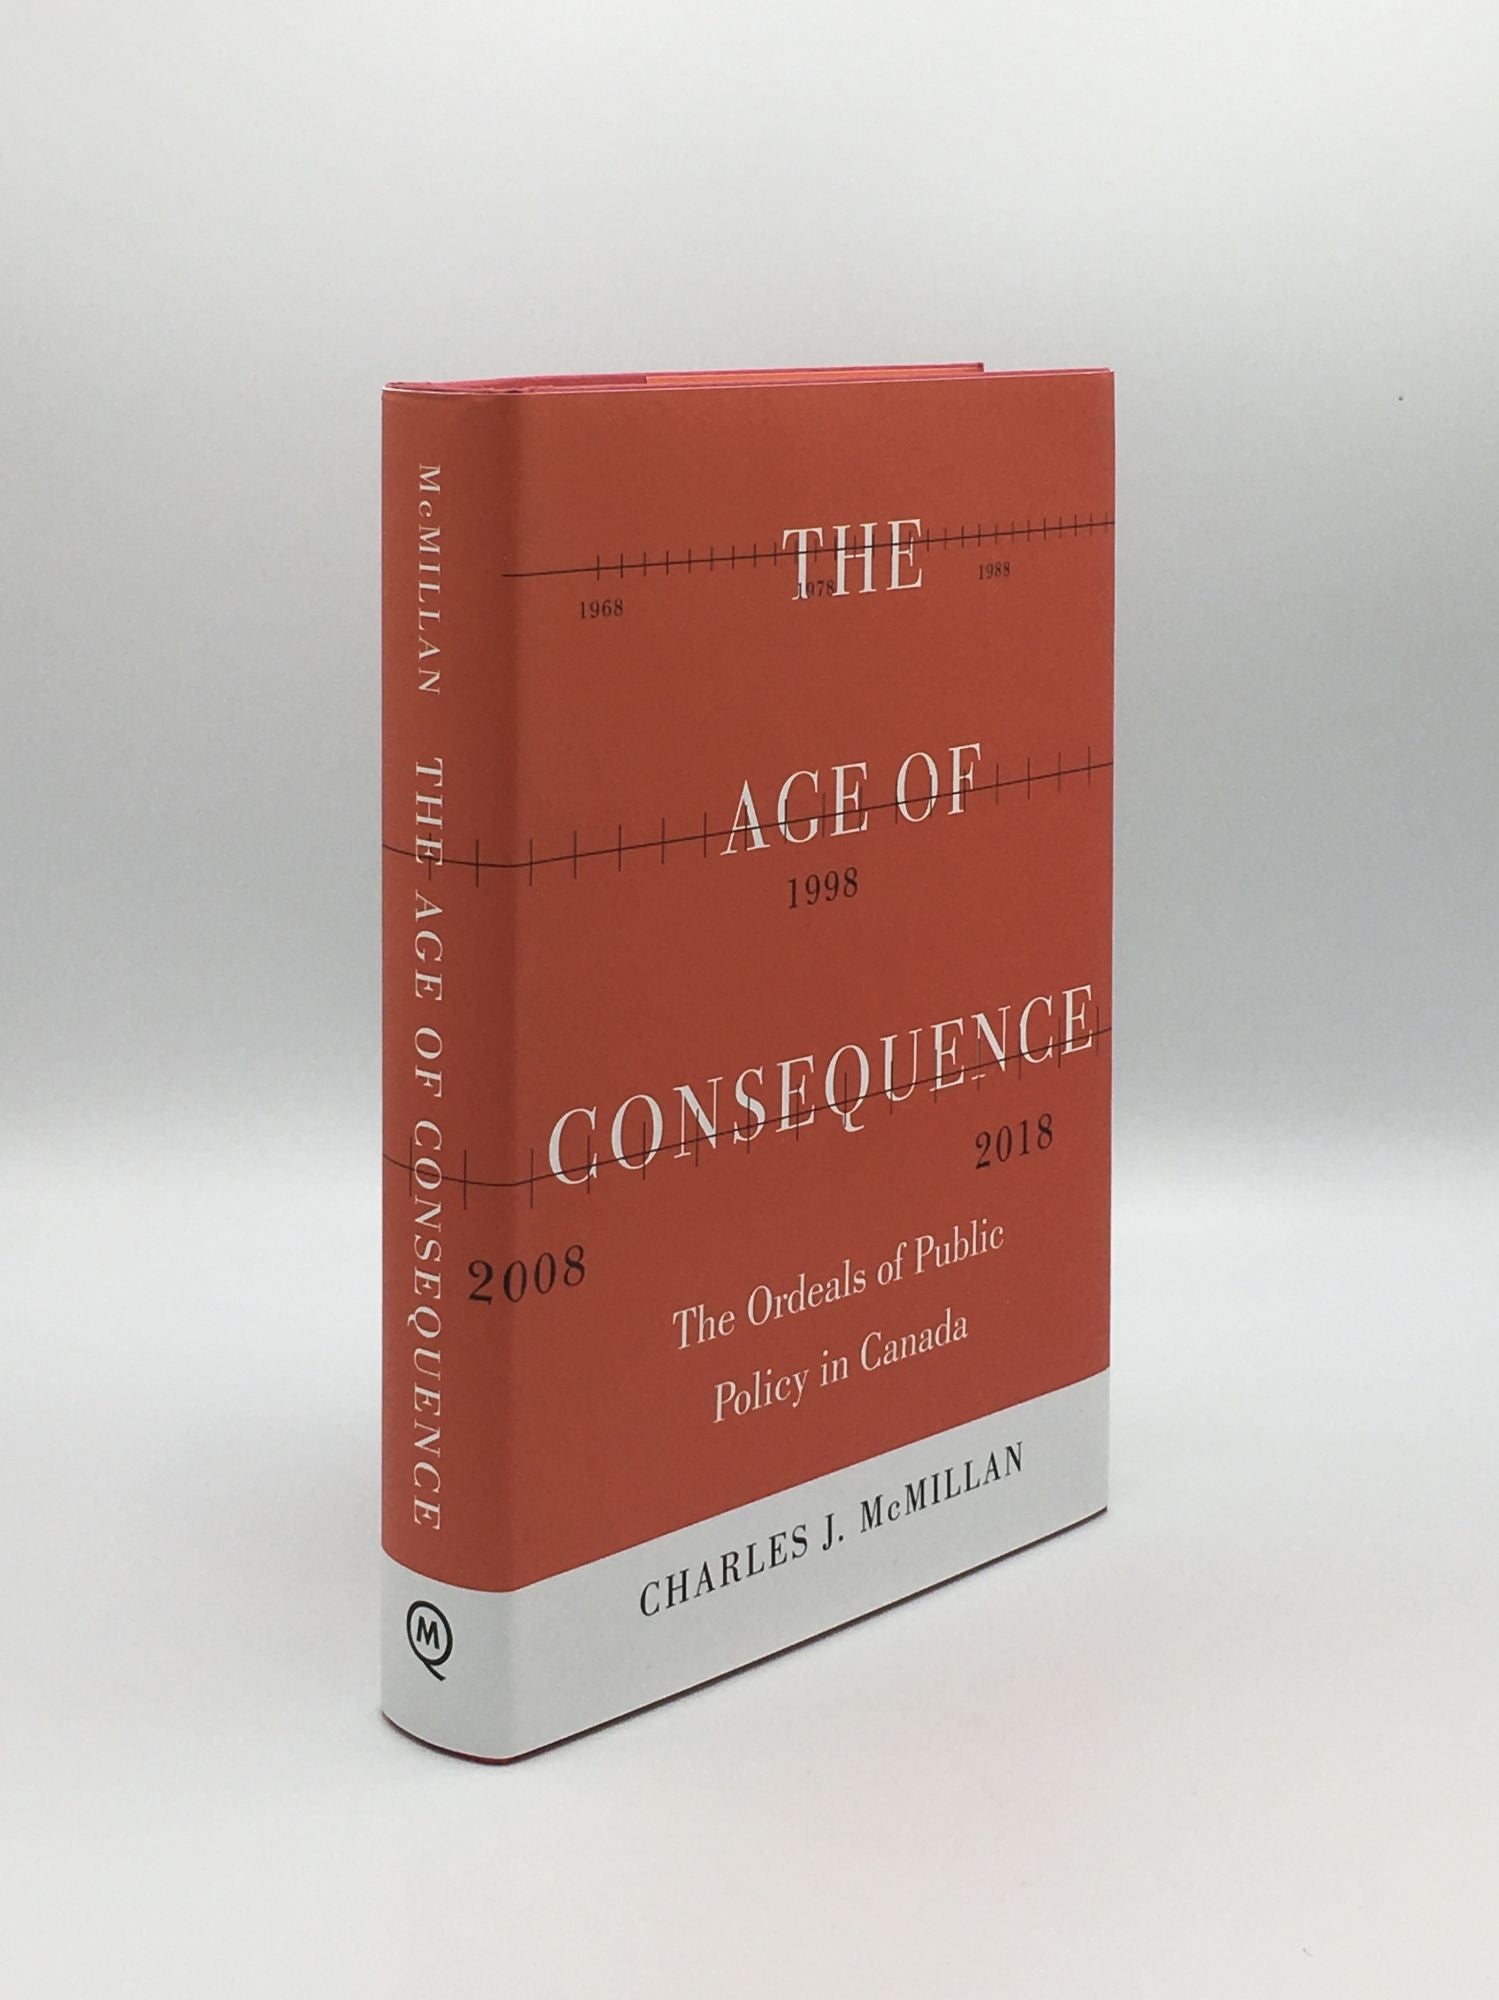 McMILLAN Charles J. - The Age of Consequence the Ordeals of Public Policy in Canada